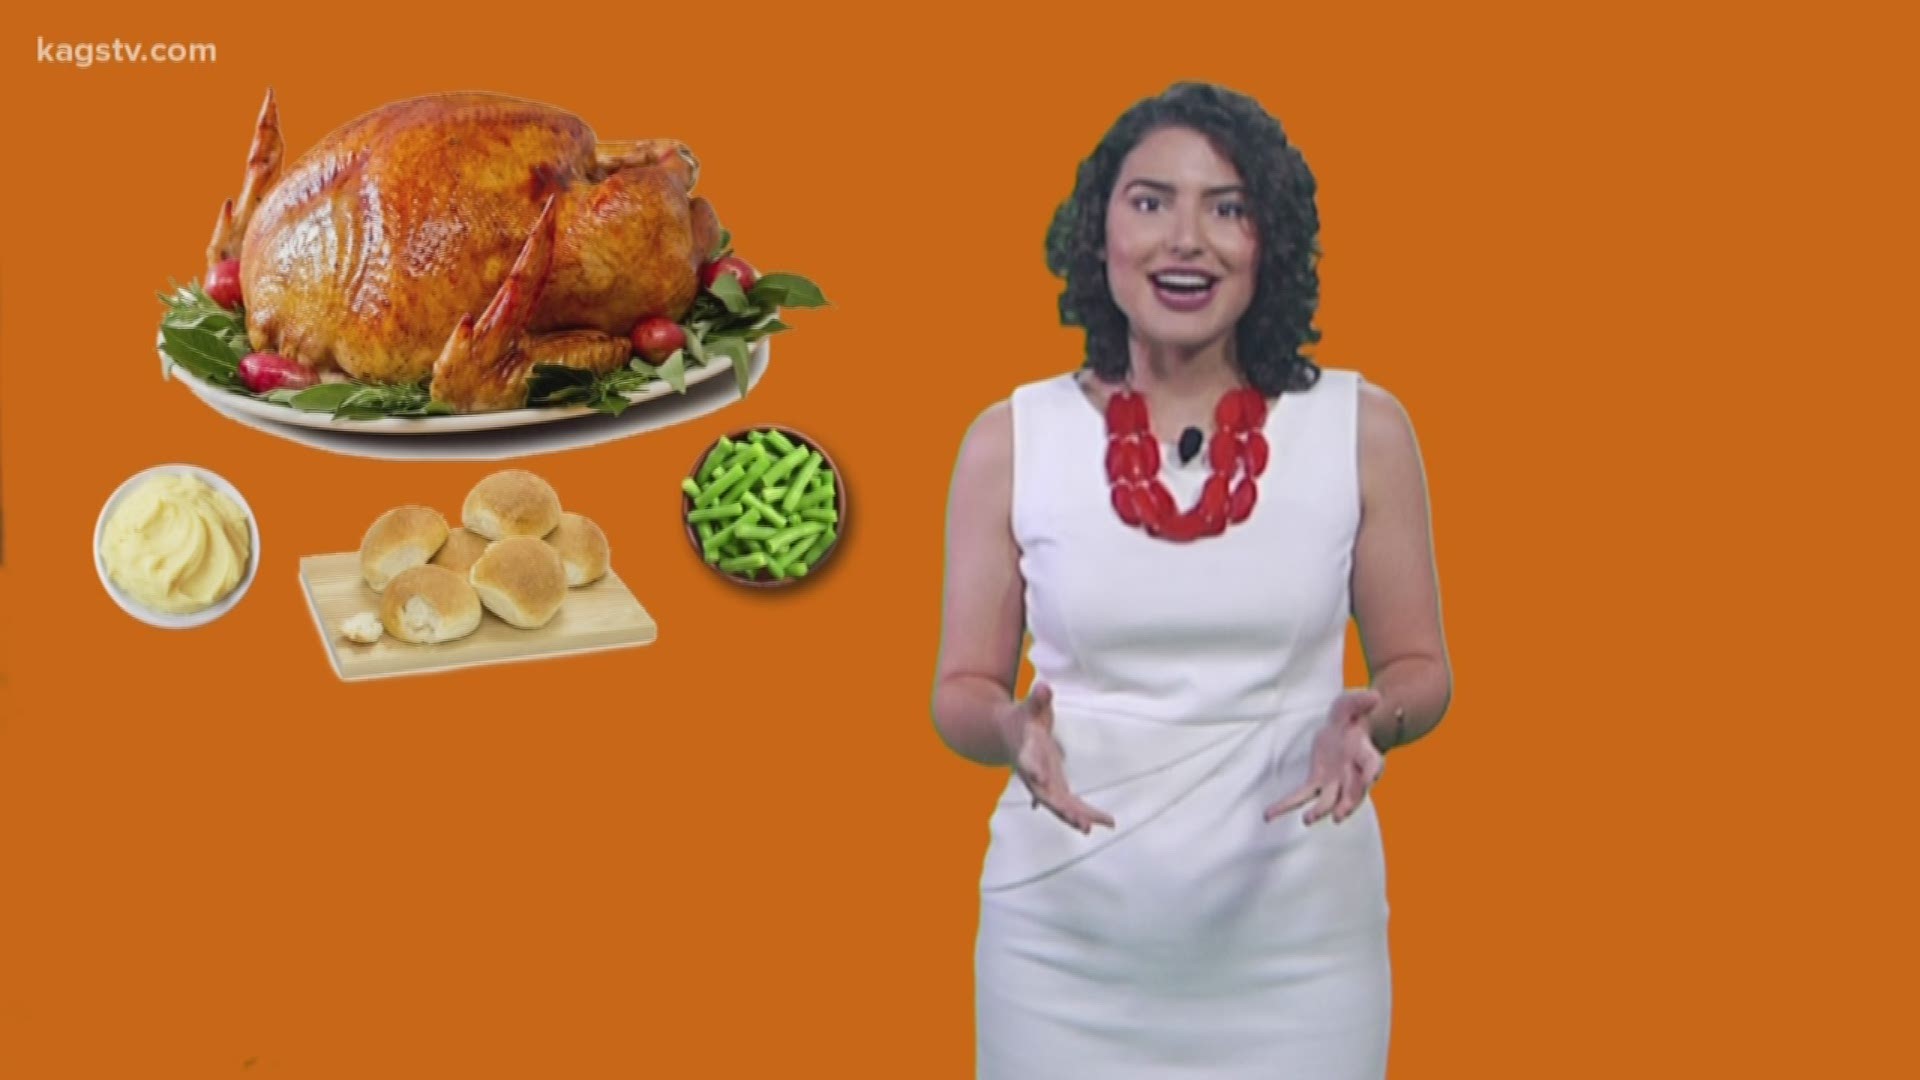 Gabriela Garcia gives some fun facts about Thanksgiving.